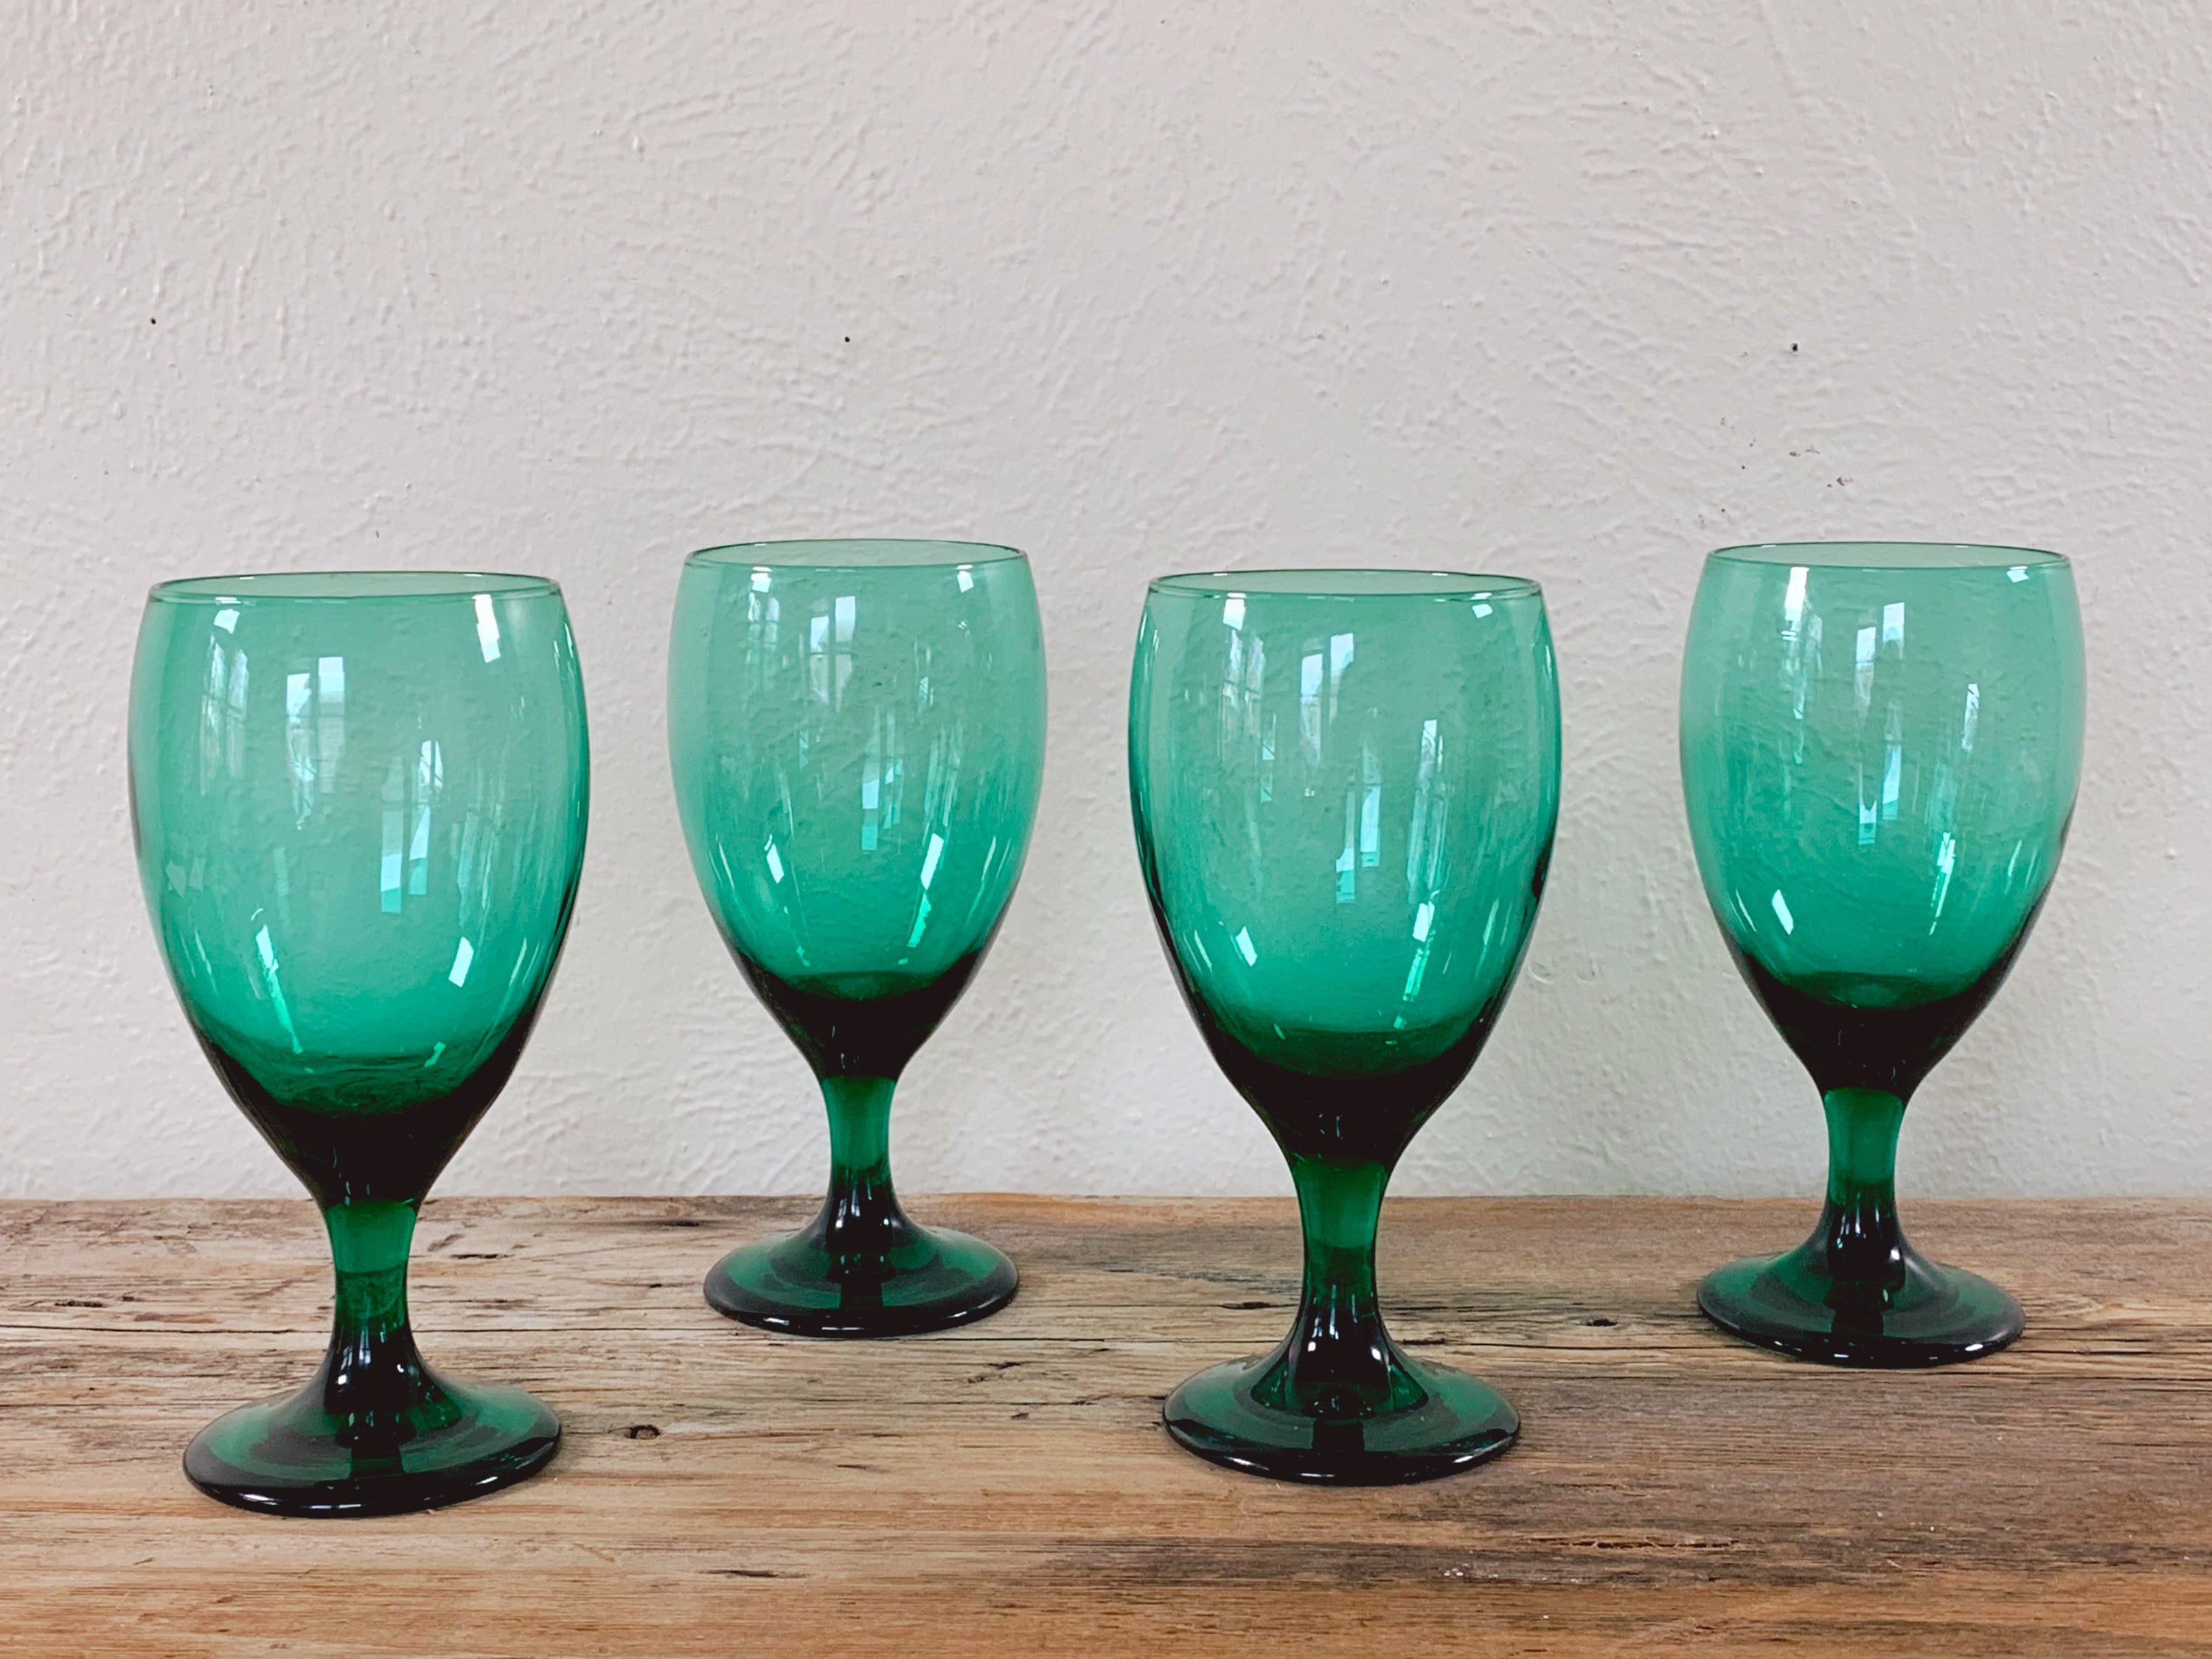 Vintage Mid-Century Libbey Juniper Green Tear Drop Wine Glasses or Water Goblets | Barware in Sets of 2, 4, 6 or 8 | Gift for Her